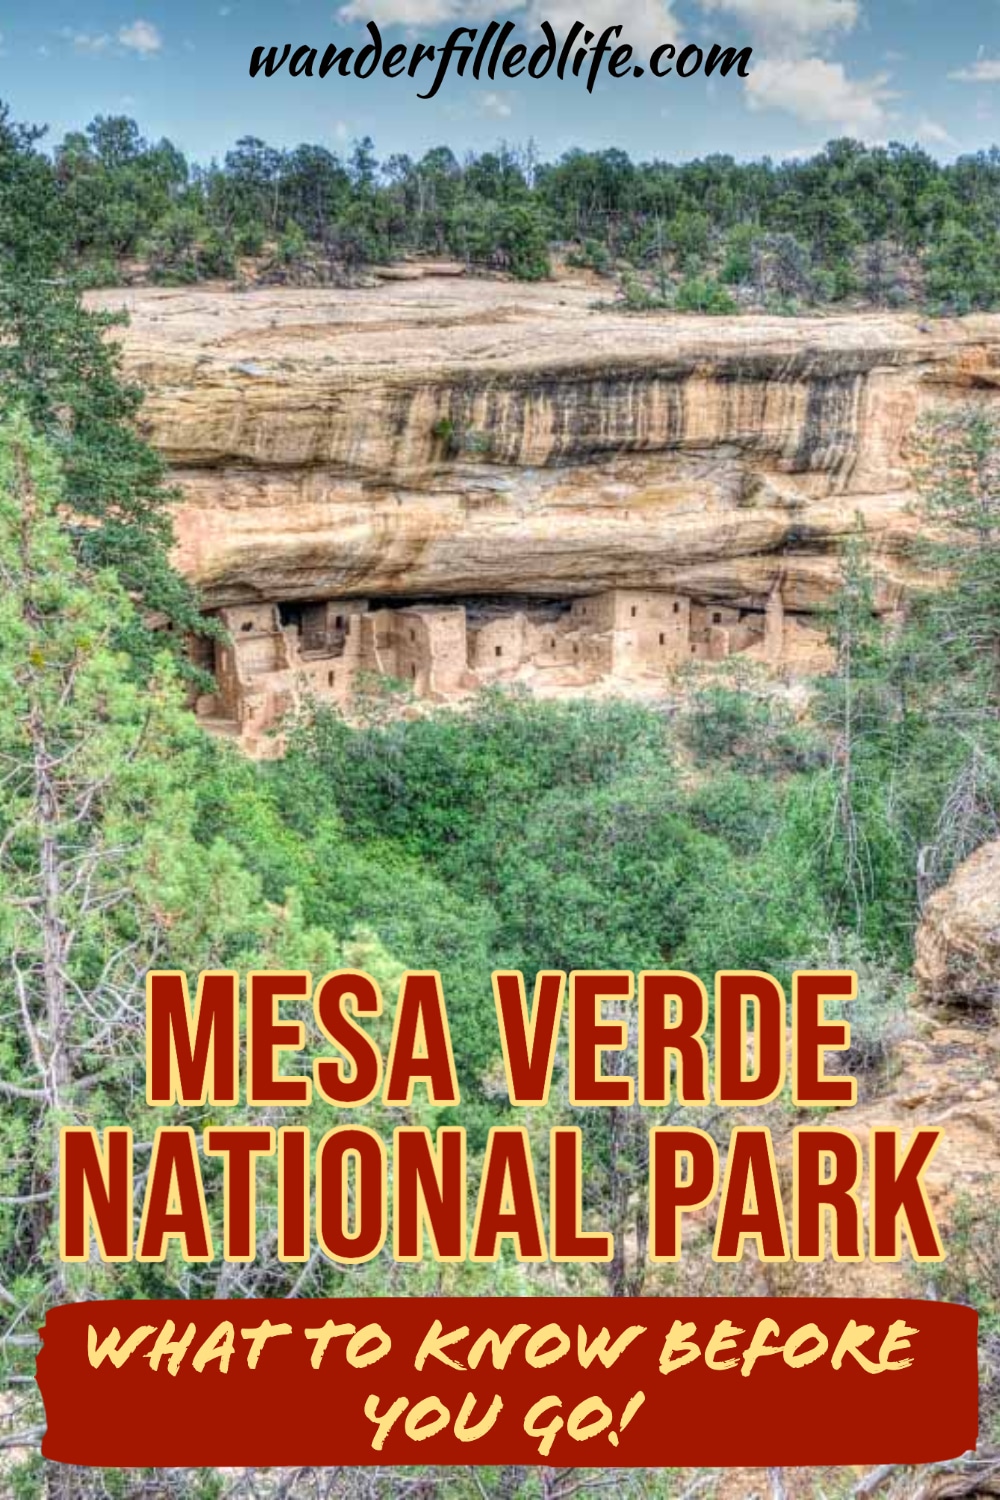 Our tips for visiting Mesa Verde National Park will help you understand the seasonal closures and what you need advance reservations for.